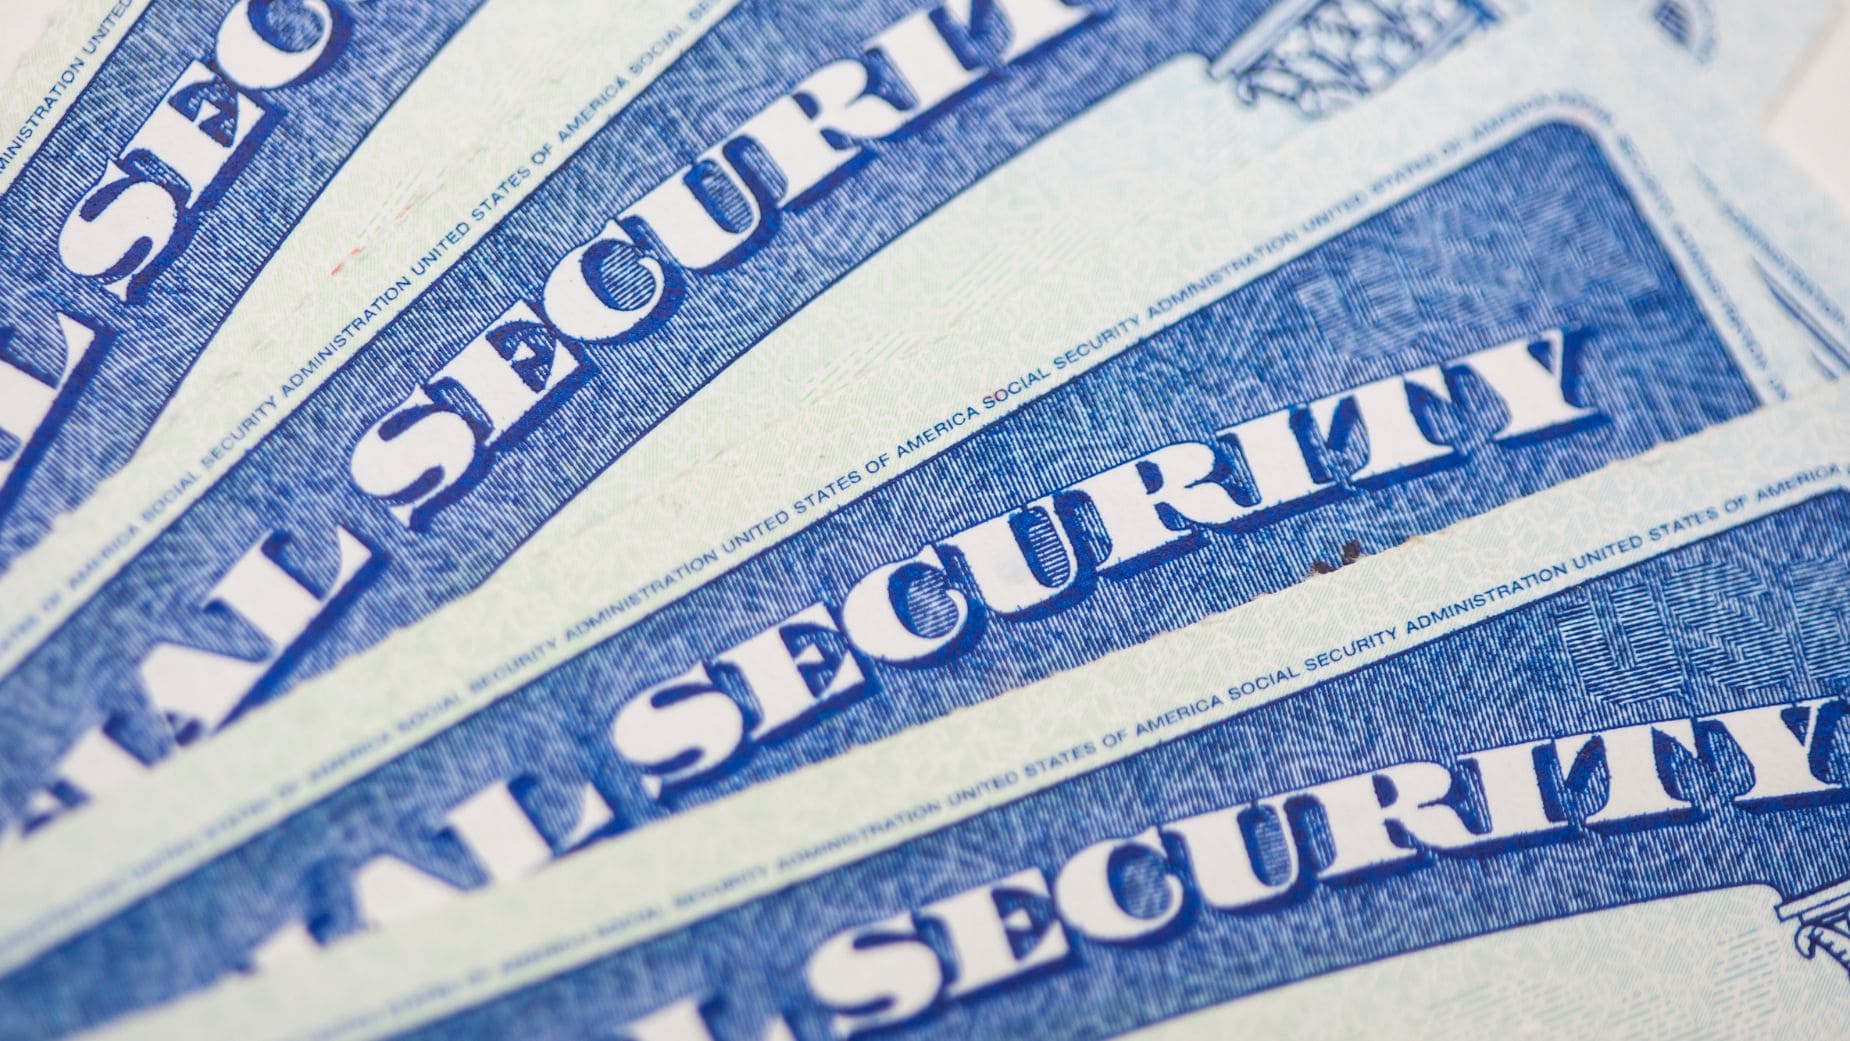 If you meet the requirements you will get an extra Social Security check today